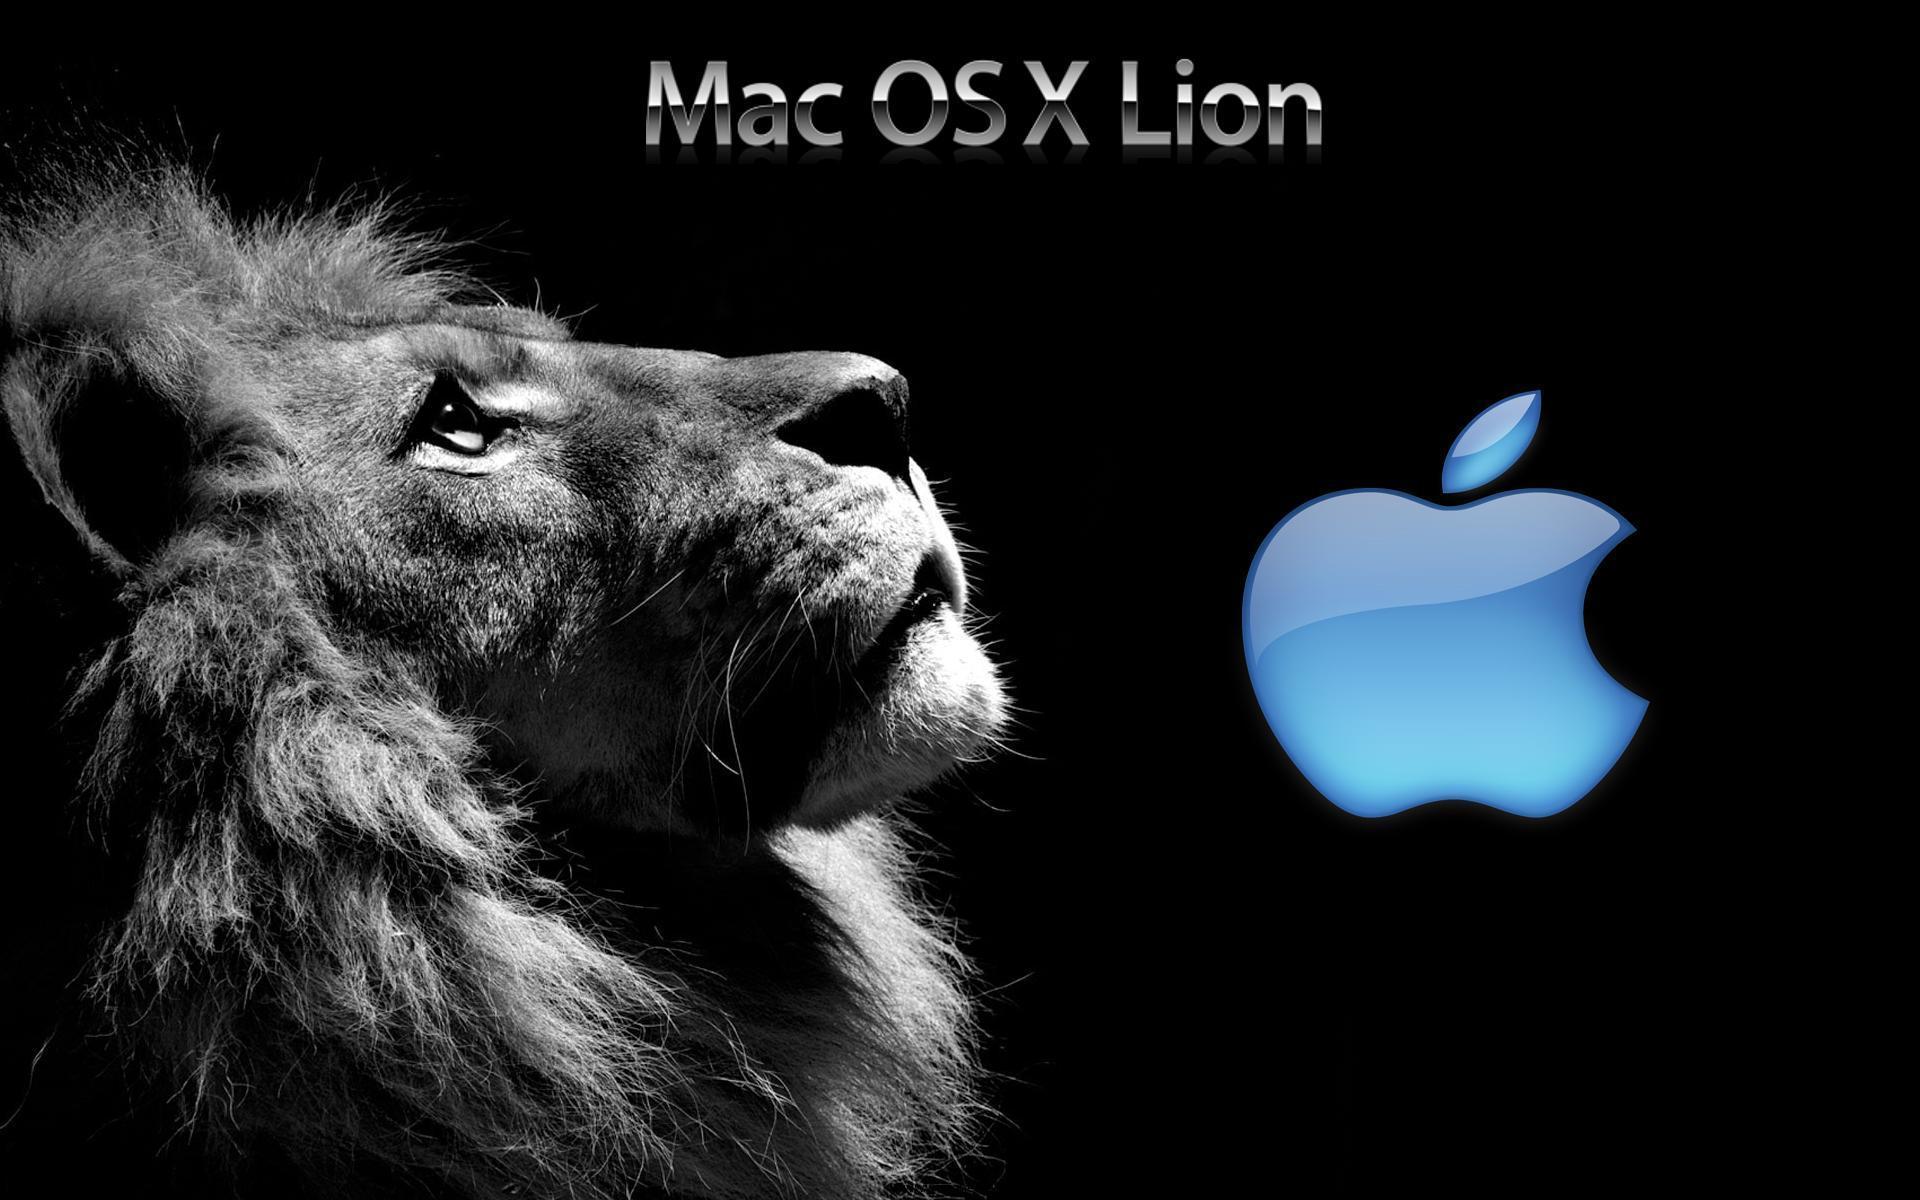 Outstanding Mac OS X Lion Wallpaper Collection